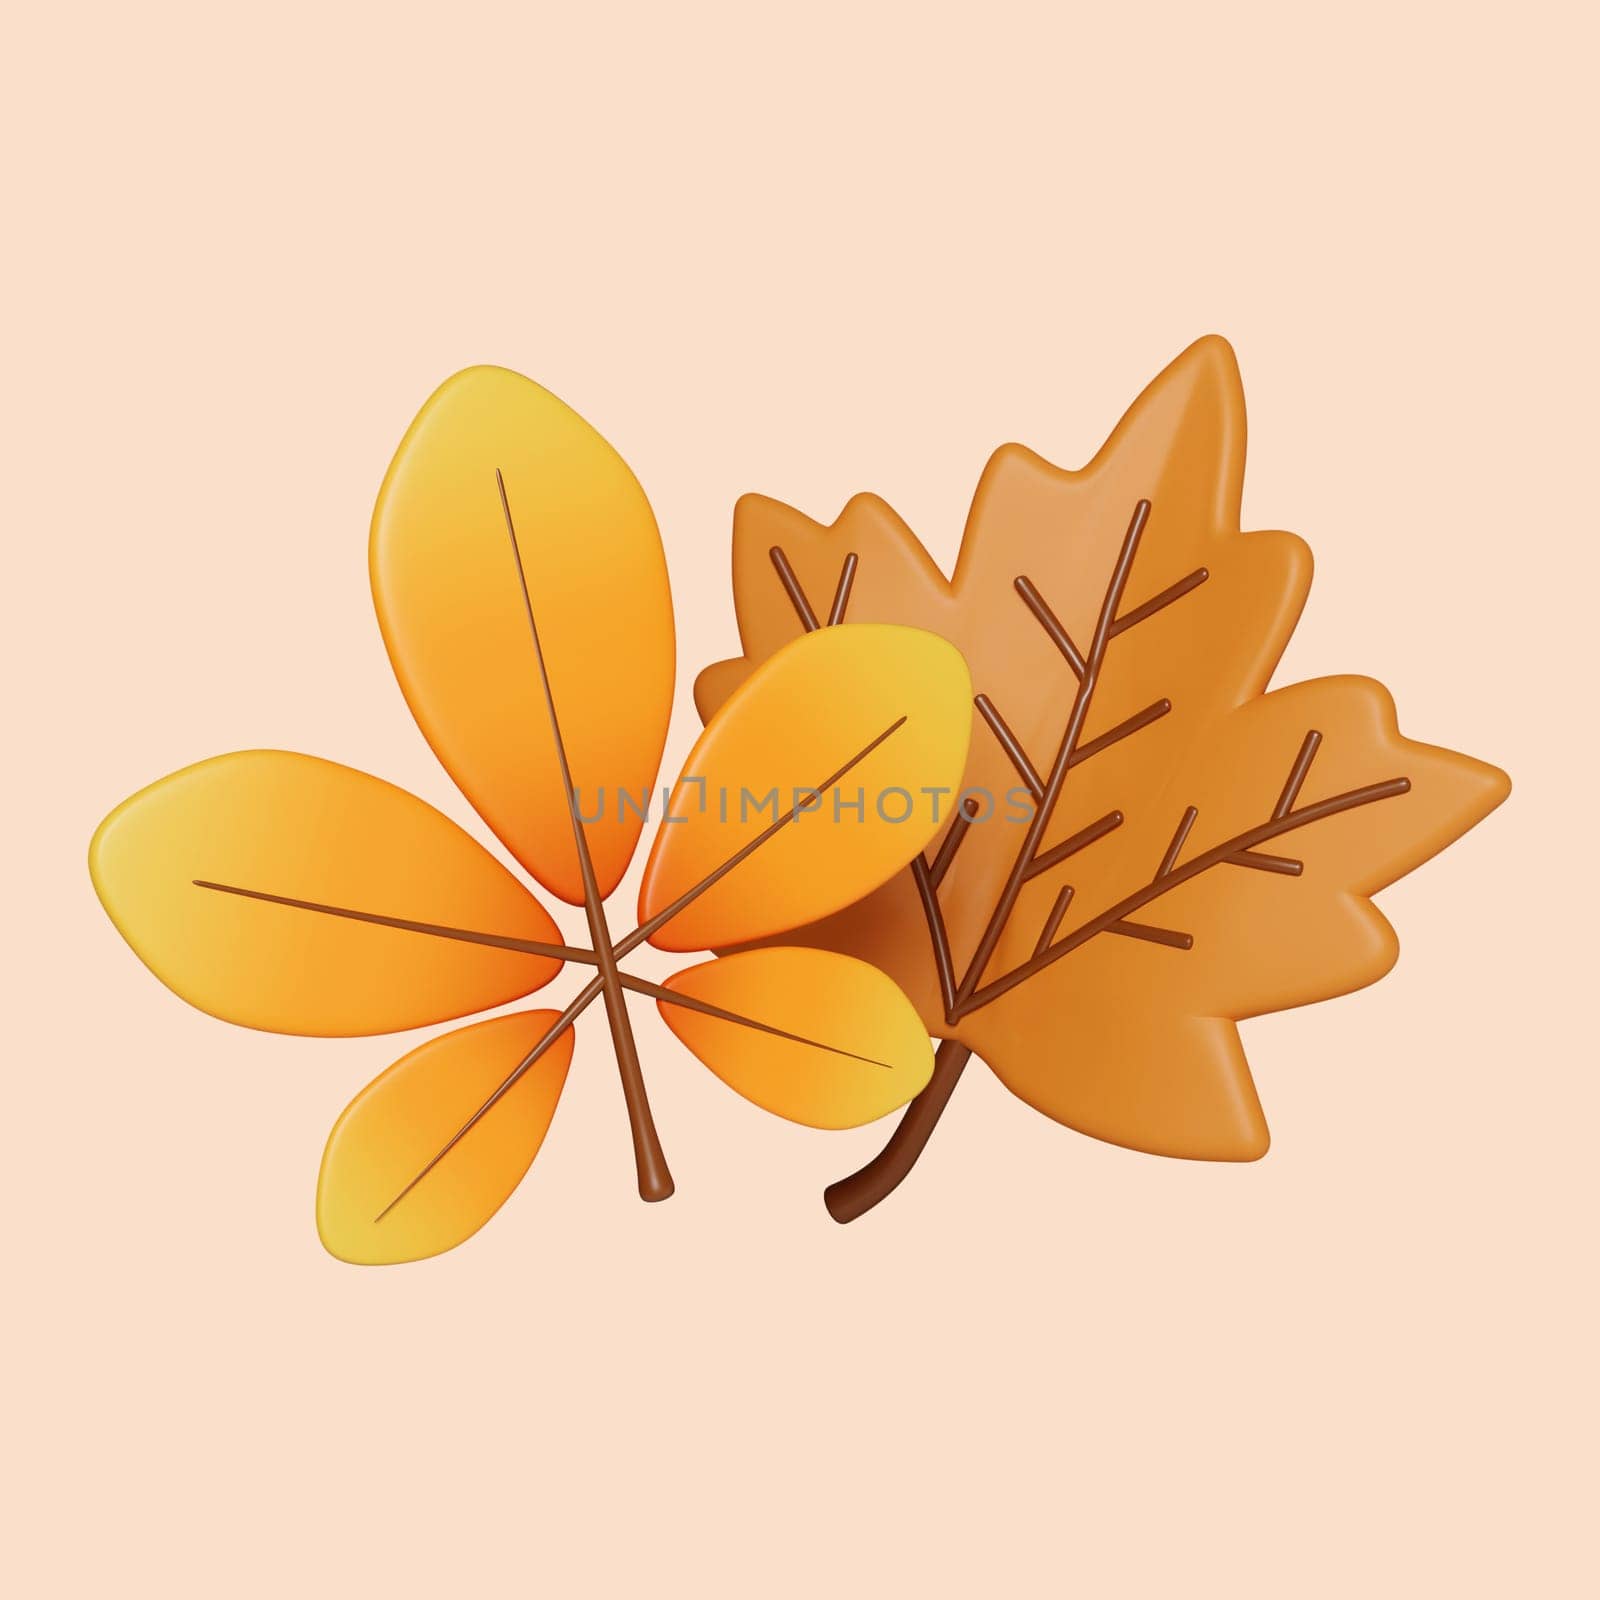 3d Autumn leaf. Golden fall. Season decoration. icon isolated on gray background. 3d rendering illustration. Clipping path. by meepiangraphic